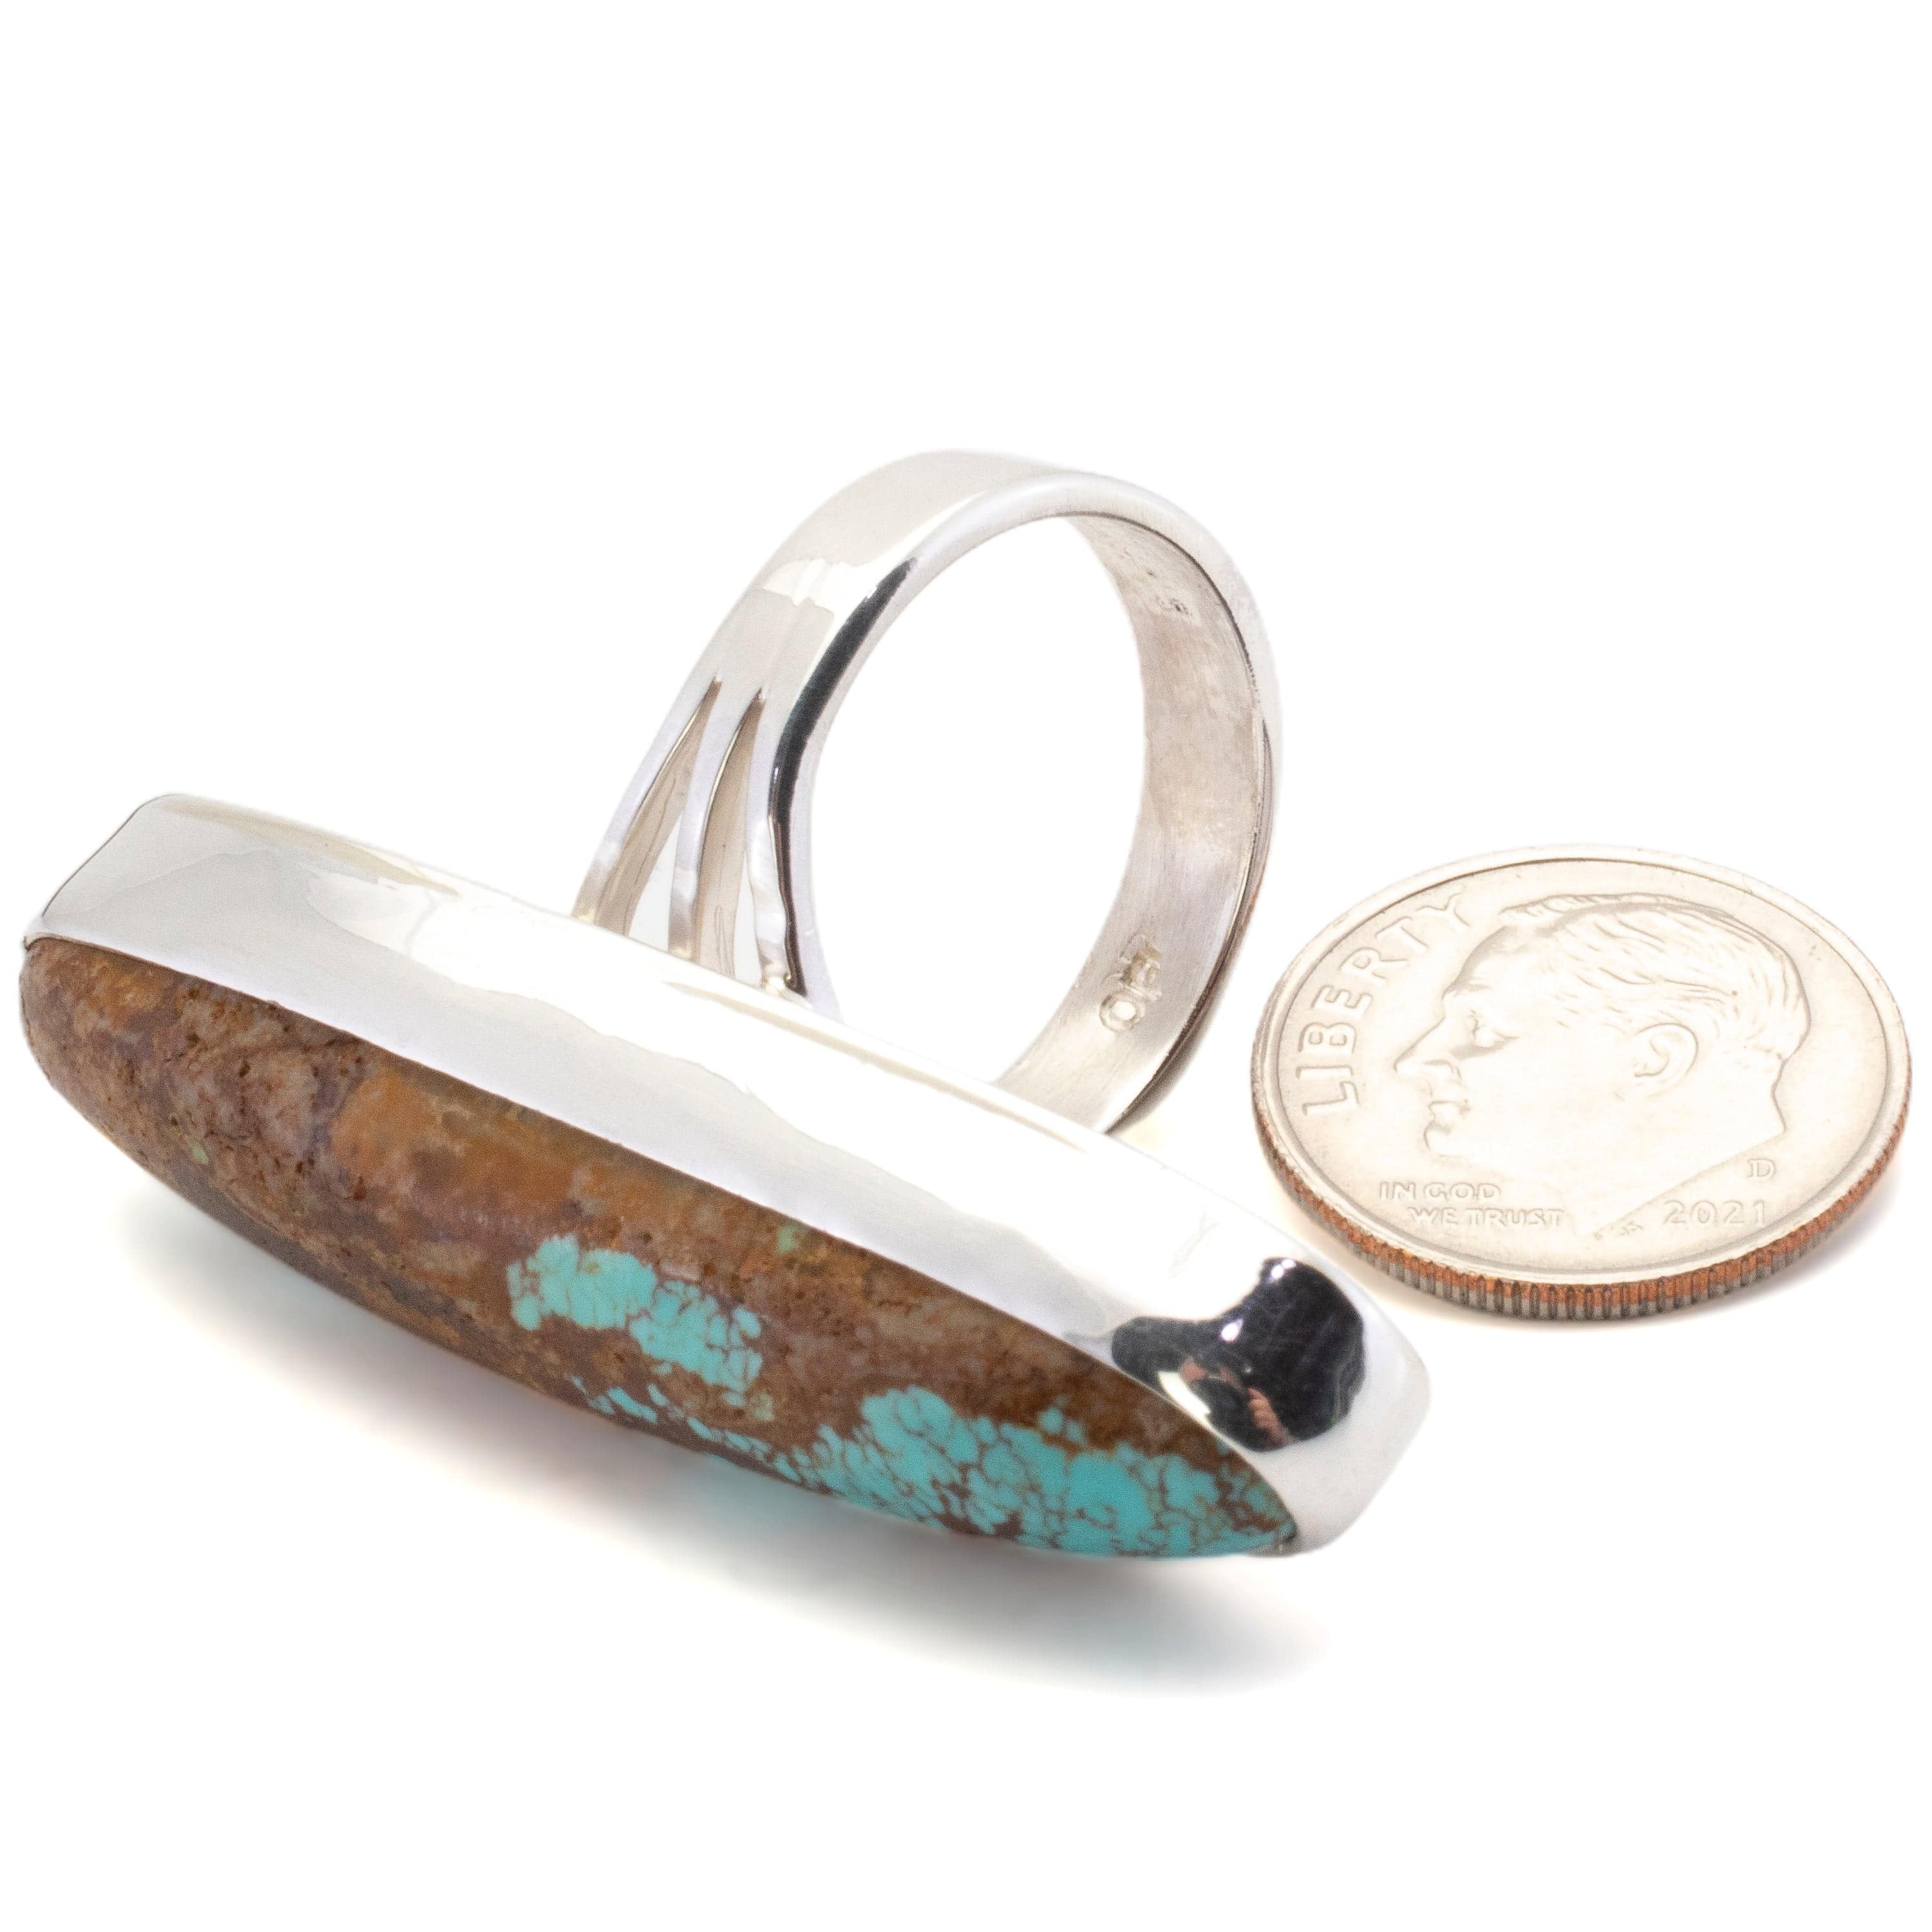 Kalifano Southwest Silver Jewelry 8 Kingman Turquoise USA Handmade 925 Sterling Silver Ring NMR500.002.8